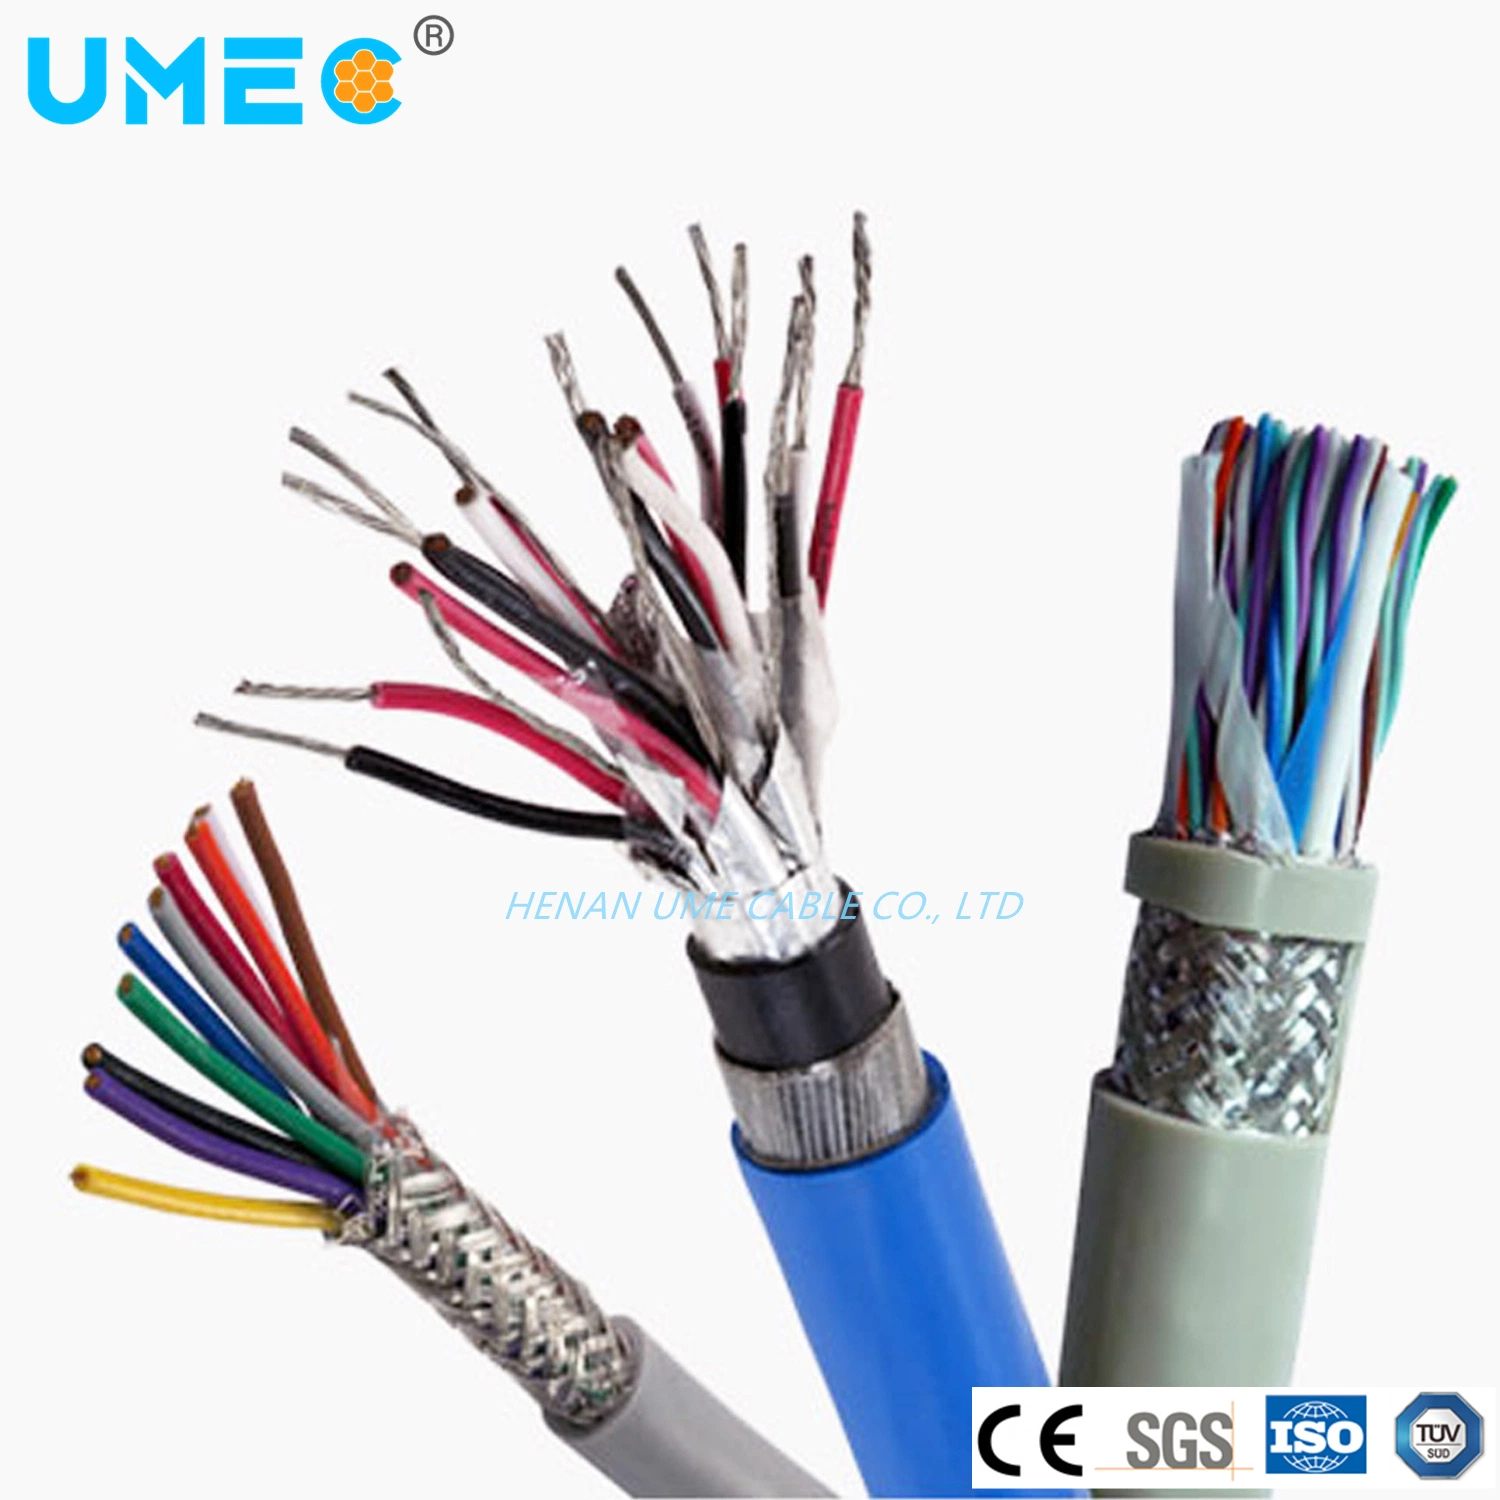 Instrument Speaker Cable BS Standard Computer Shielded Cable Cable for DSC System Djyvpr 2X1.5mm2